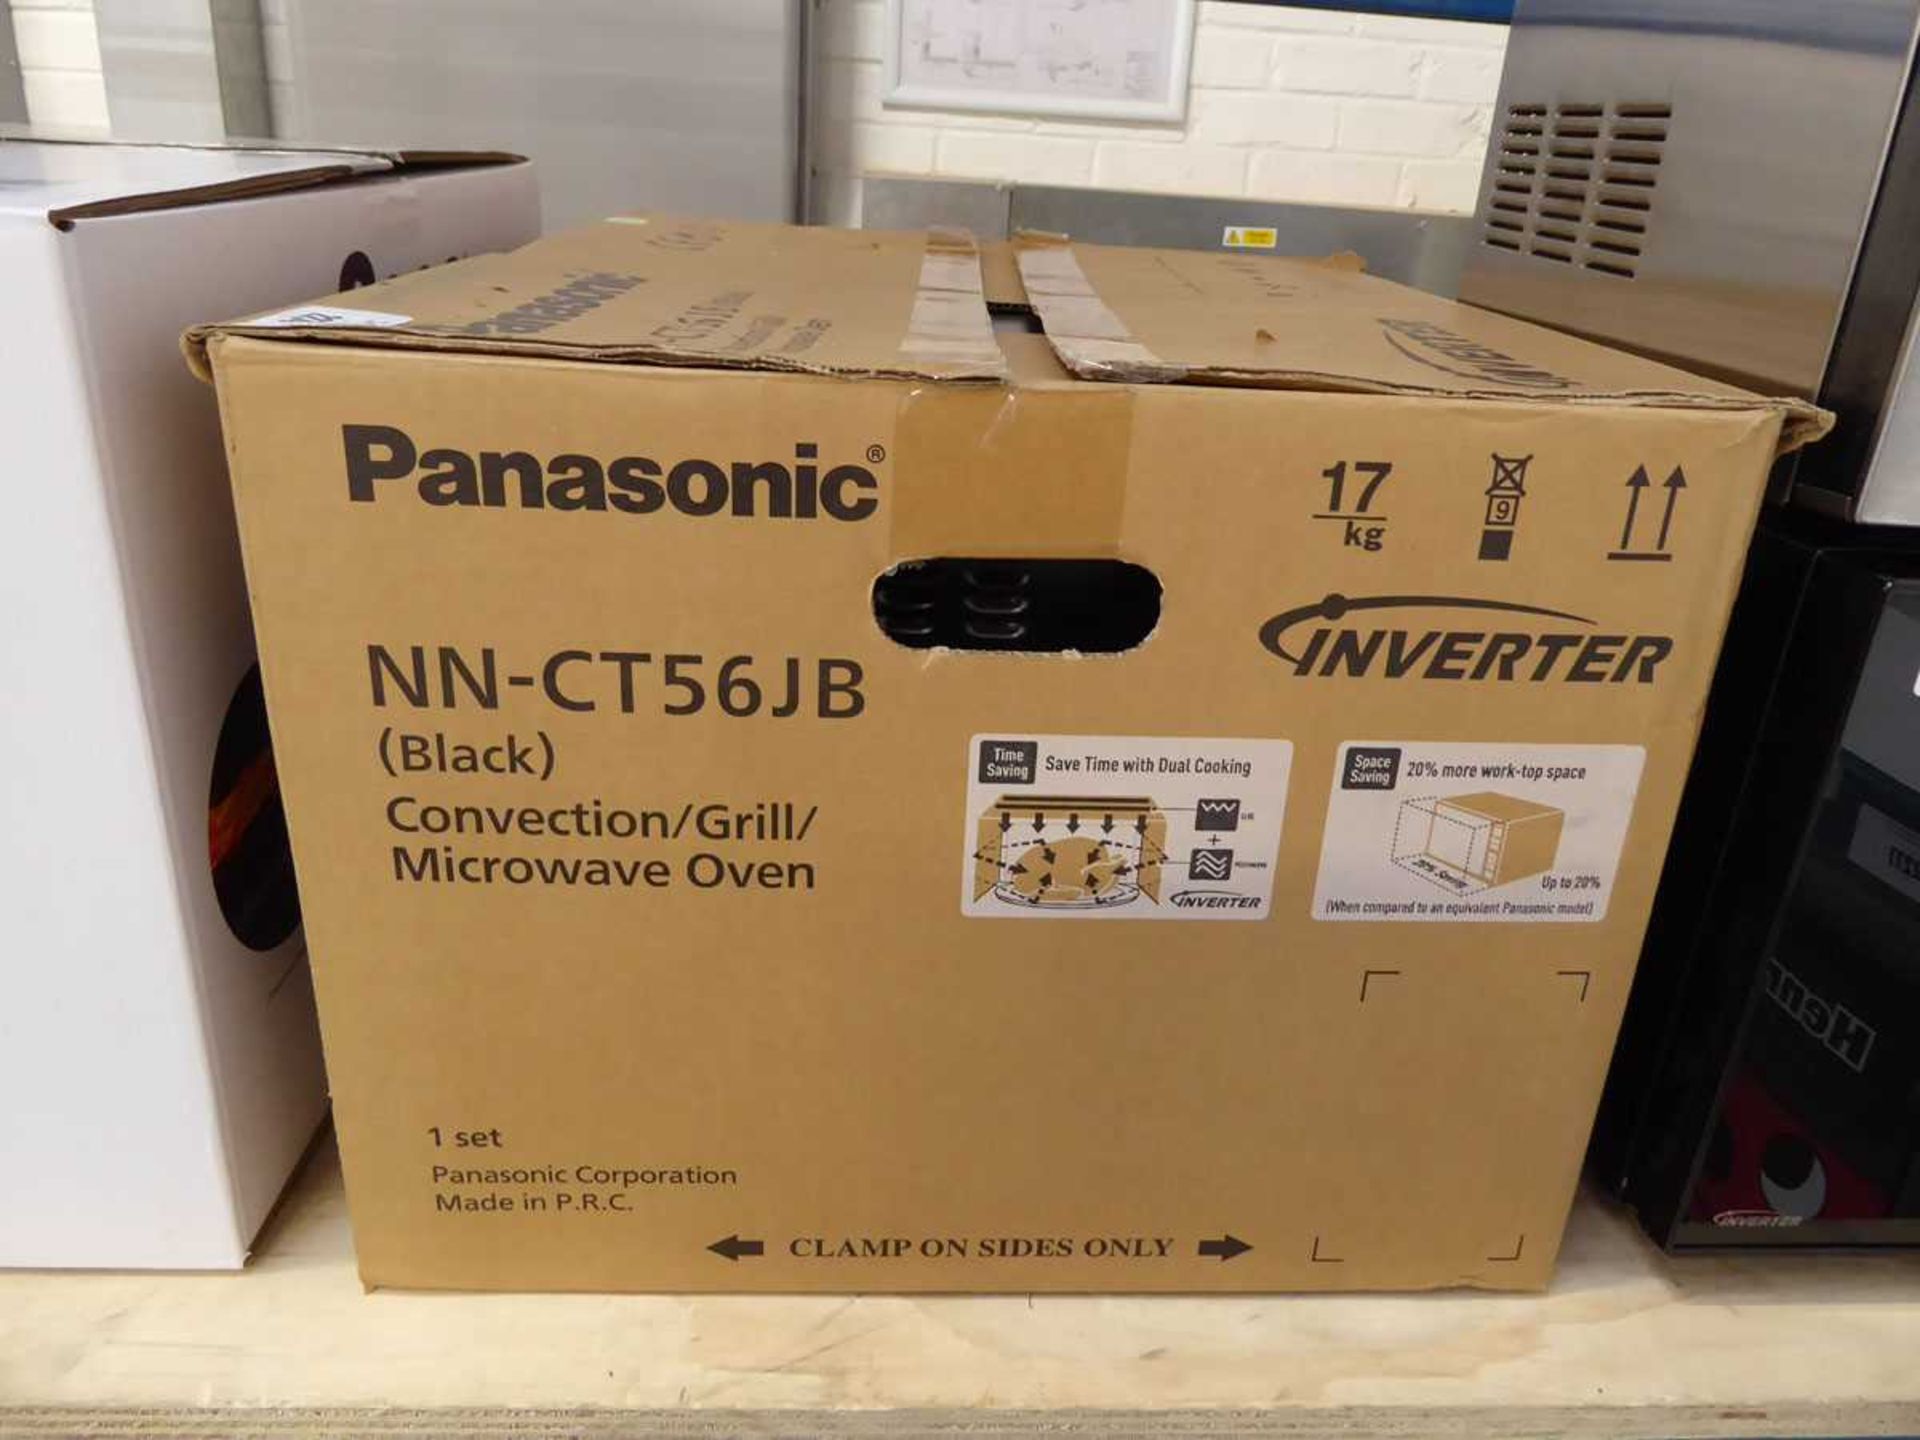 +VAT Panasonic convection grill/ microwave oven in black (NN-CT56JB)